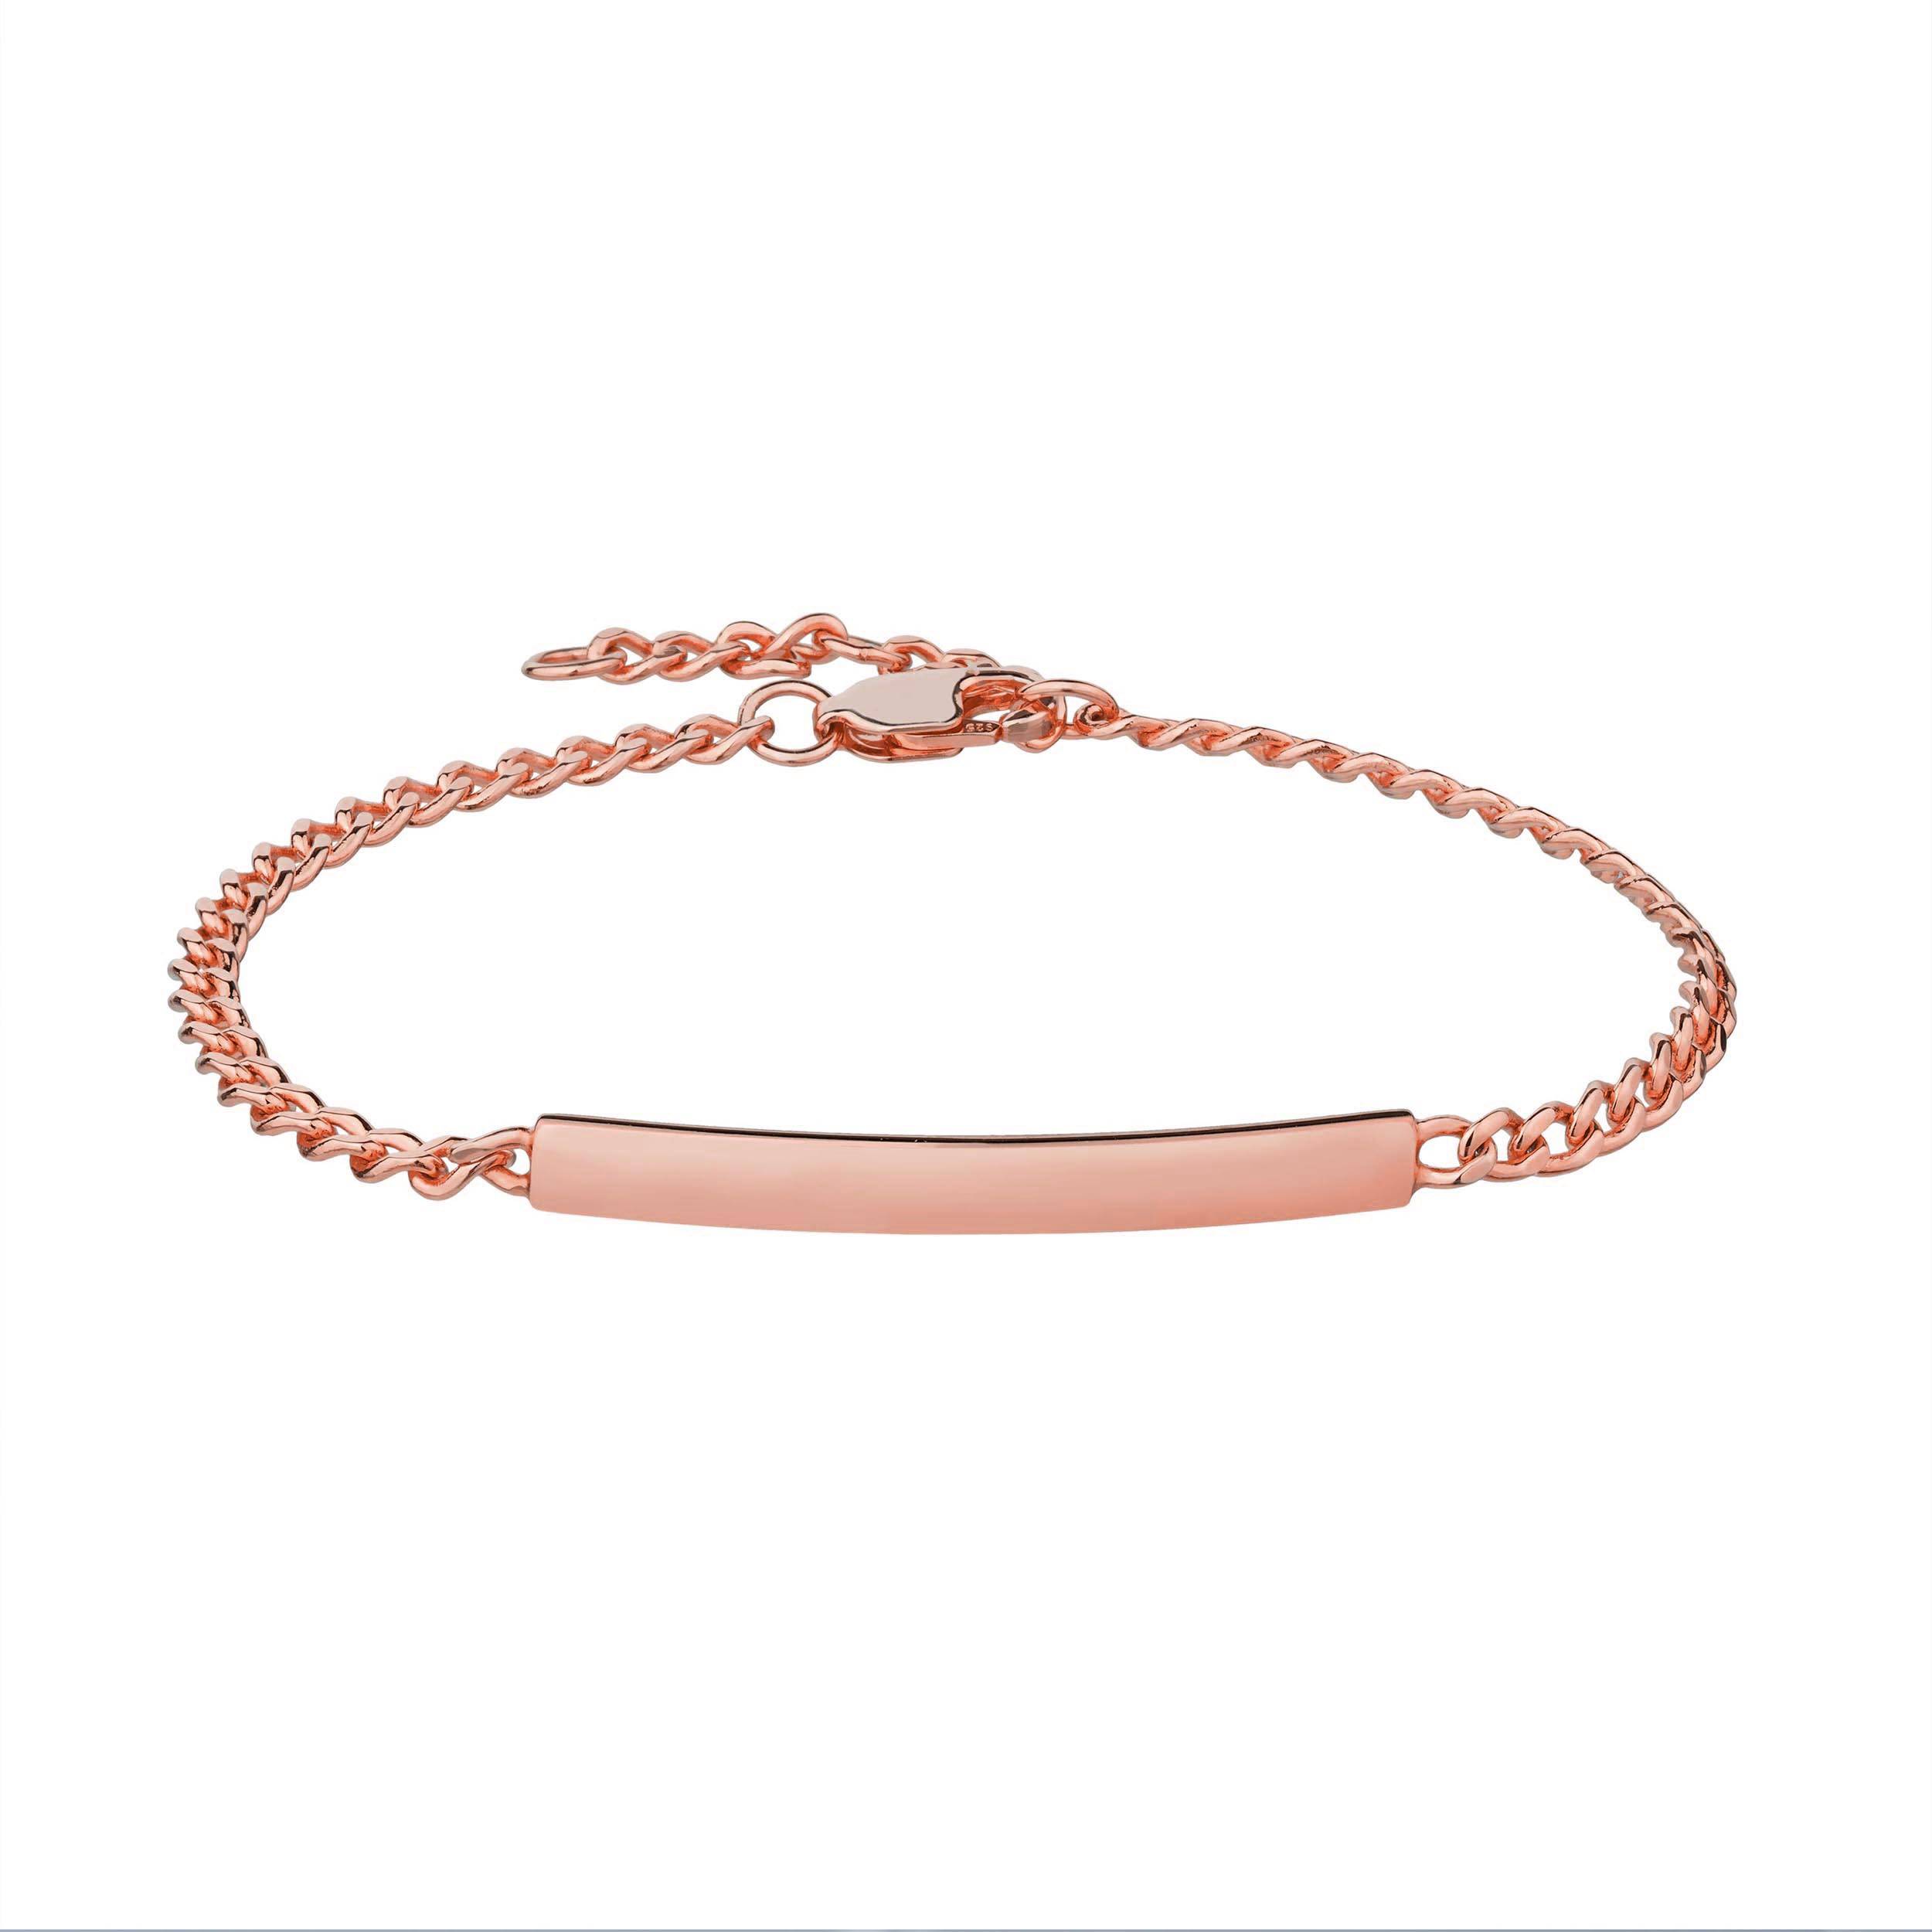 Classy Cuff Bracelet Personalized Rose Gold: Gift/Send Jewellery Gifts  Online JVS1240212 |IGP.com